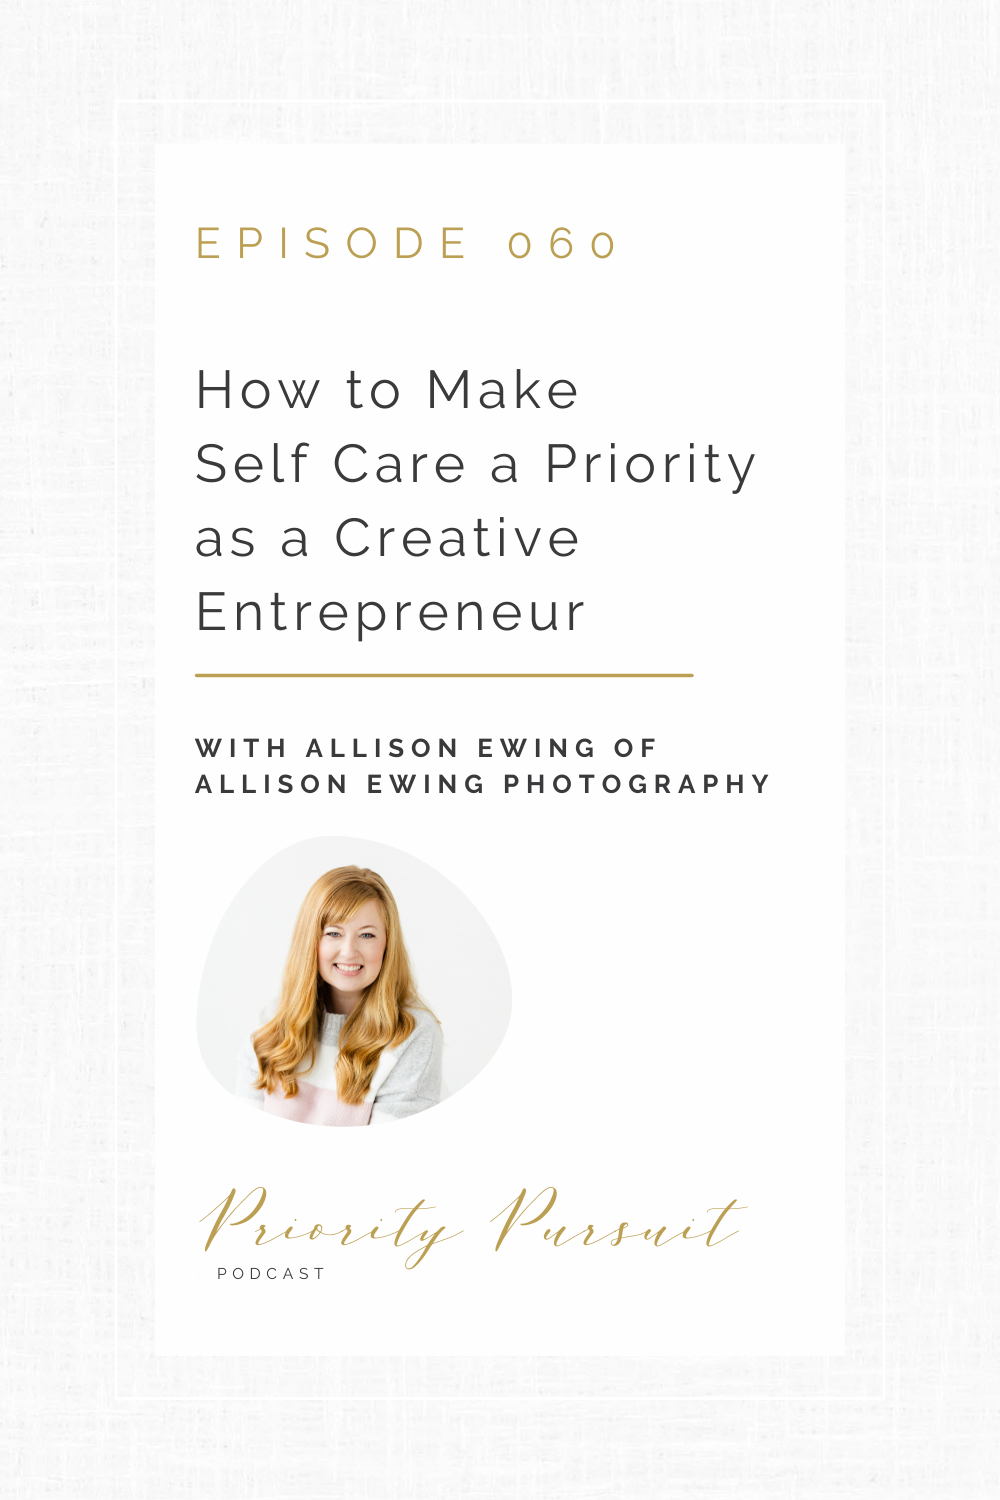 Victoria Rayburn and Allison Ewing discuss how to prioritize self-care as a creative entrepreneur.